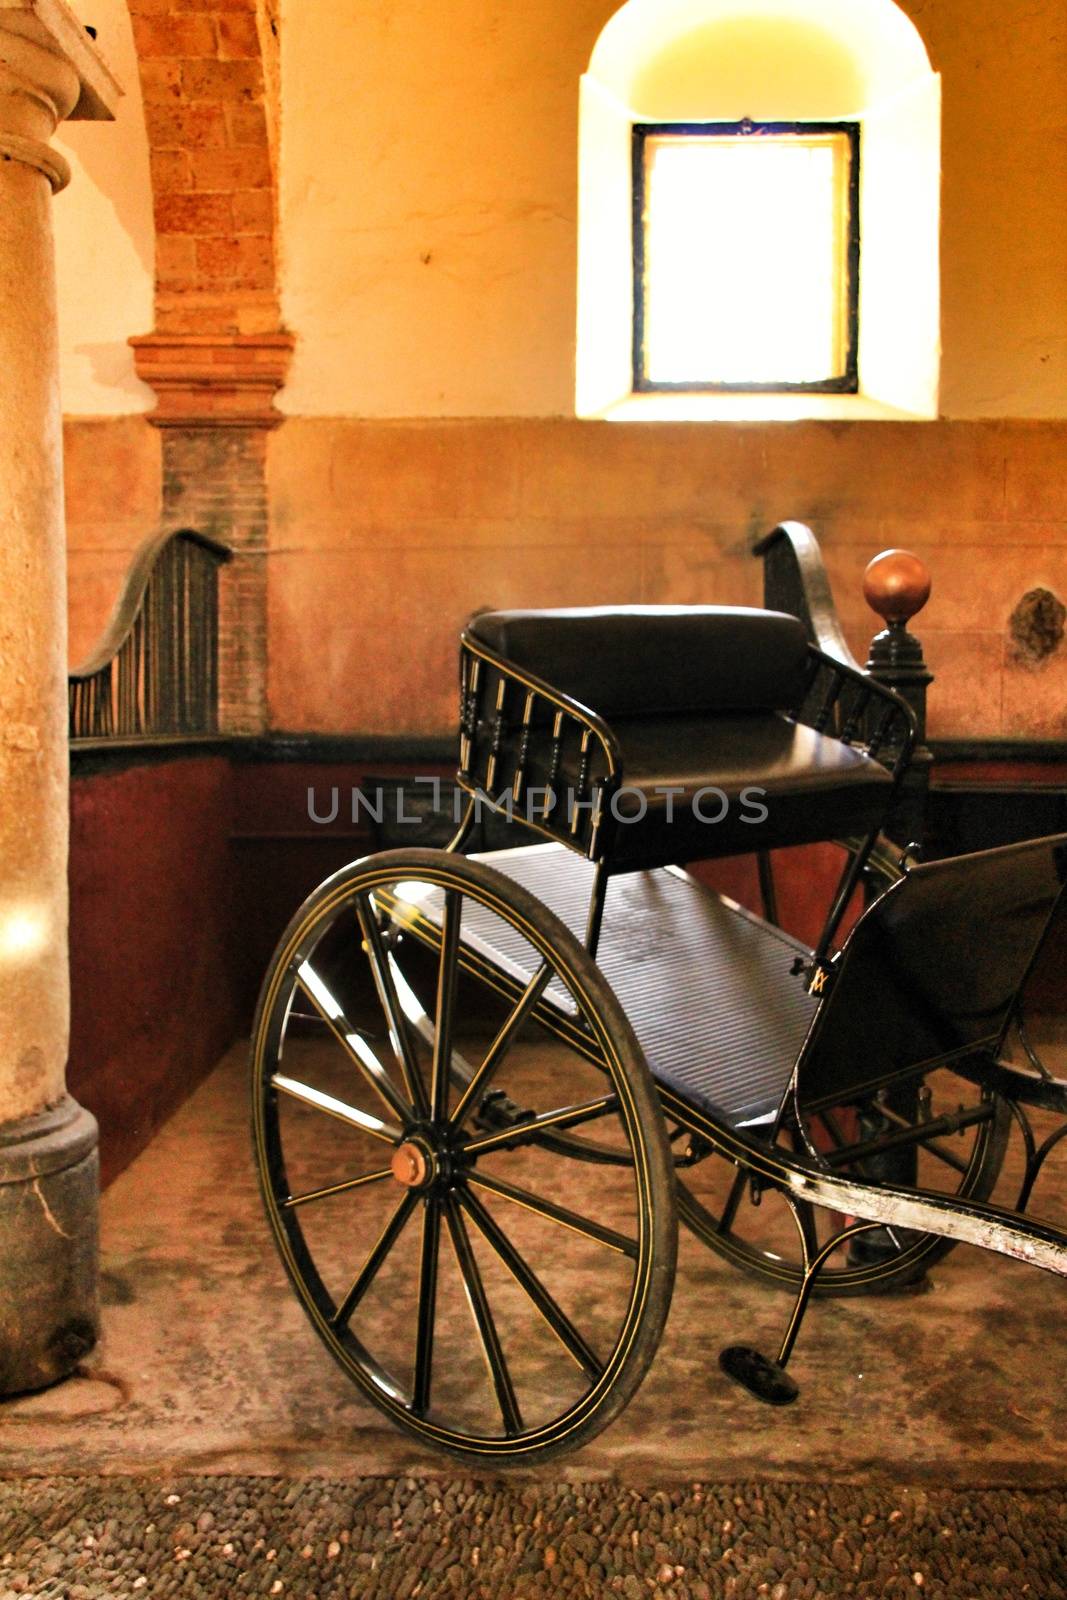 Old carriages in a house in Cordoba by soniabonet